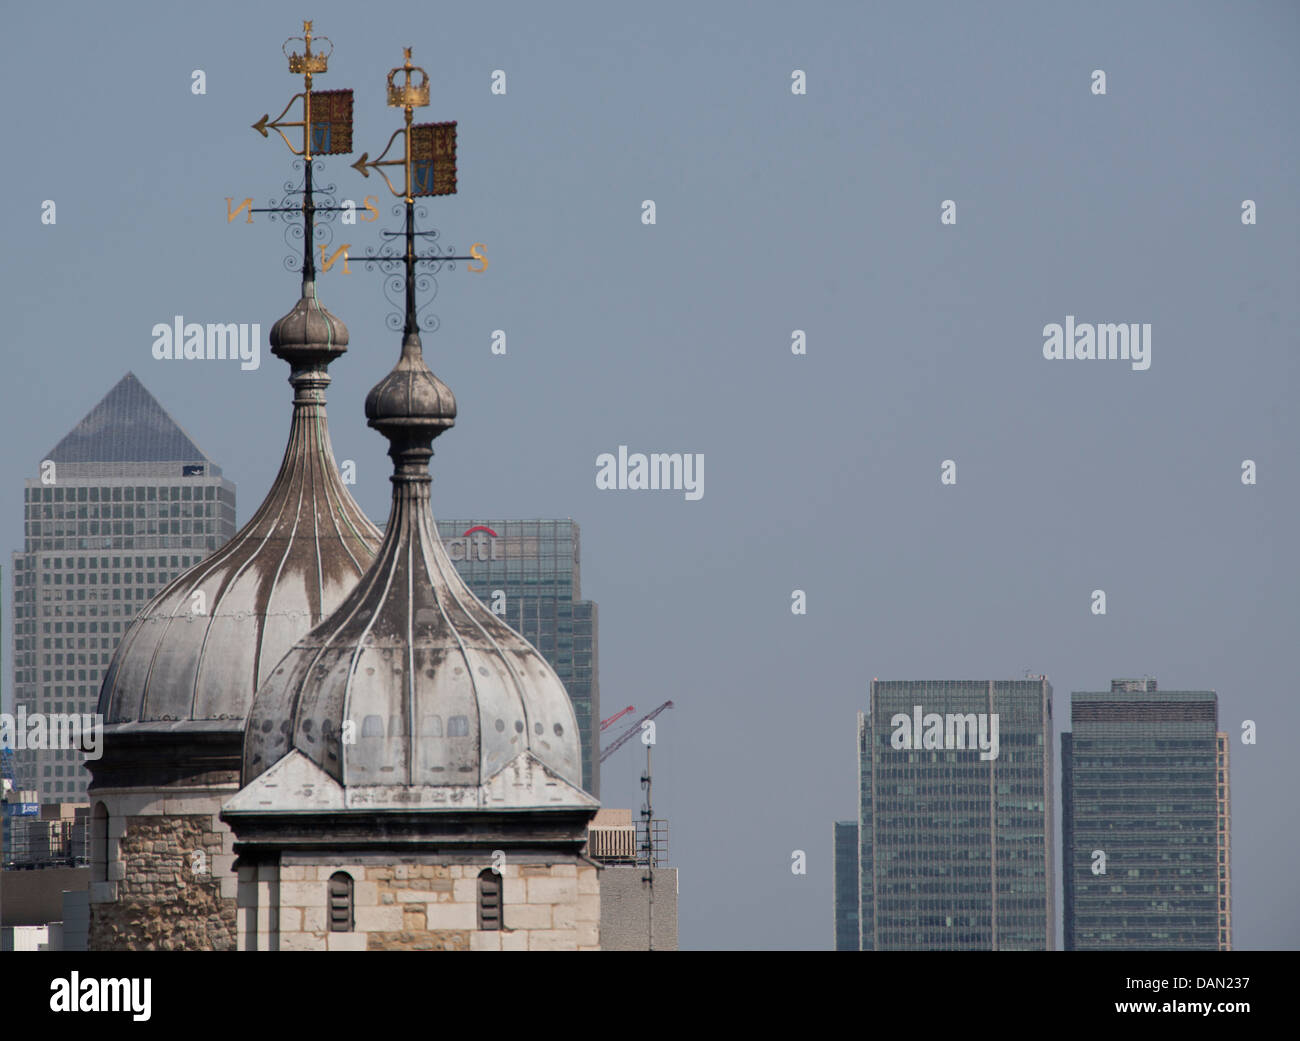 Close up of towers at Tower of London with Canary Wharf skyscrapers behind Stock Photo